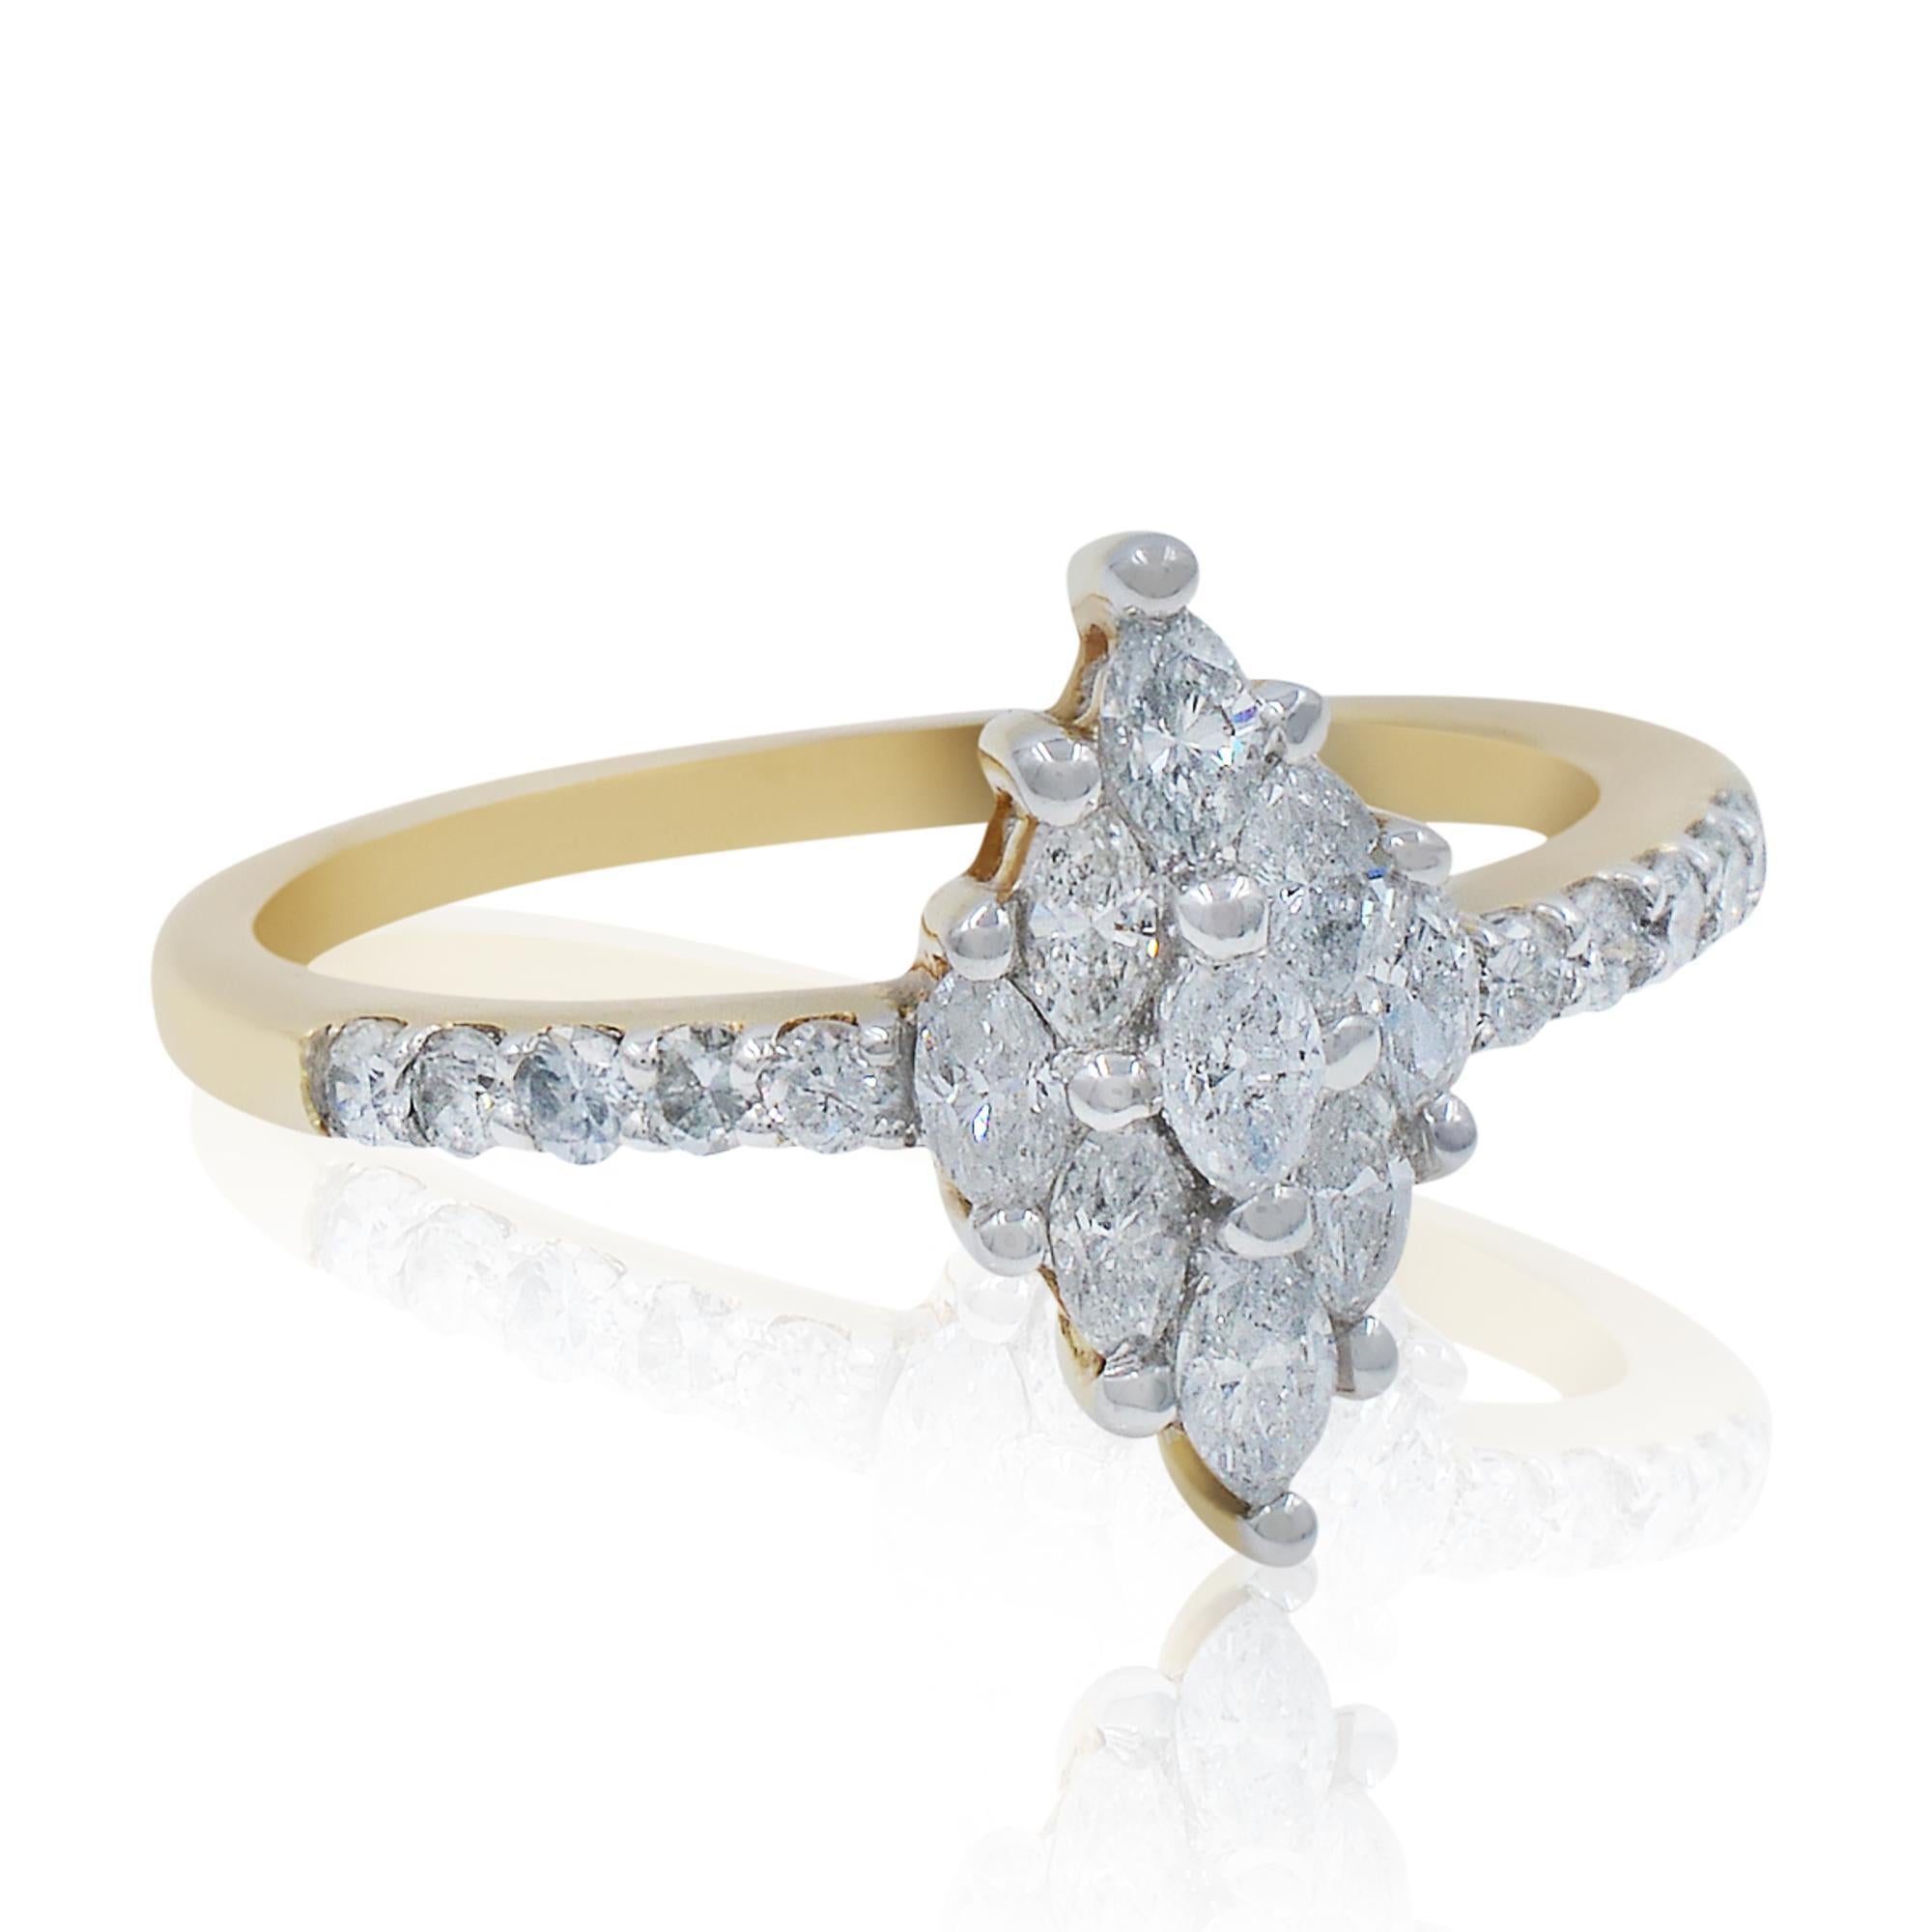 This absolutely outstanding cocktail ring is crafted in 14k yellow gold. Nice marquise cut diamonds are set in rhombus shape shank and accented with five round diamonds on each side set in micro pave. Total diamond weight is 1.13cts. Ring size: 7,